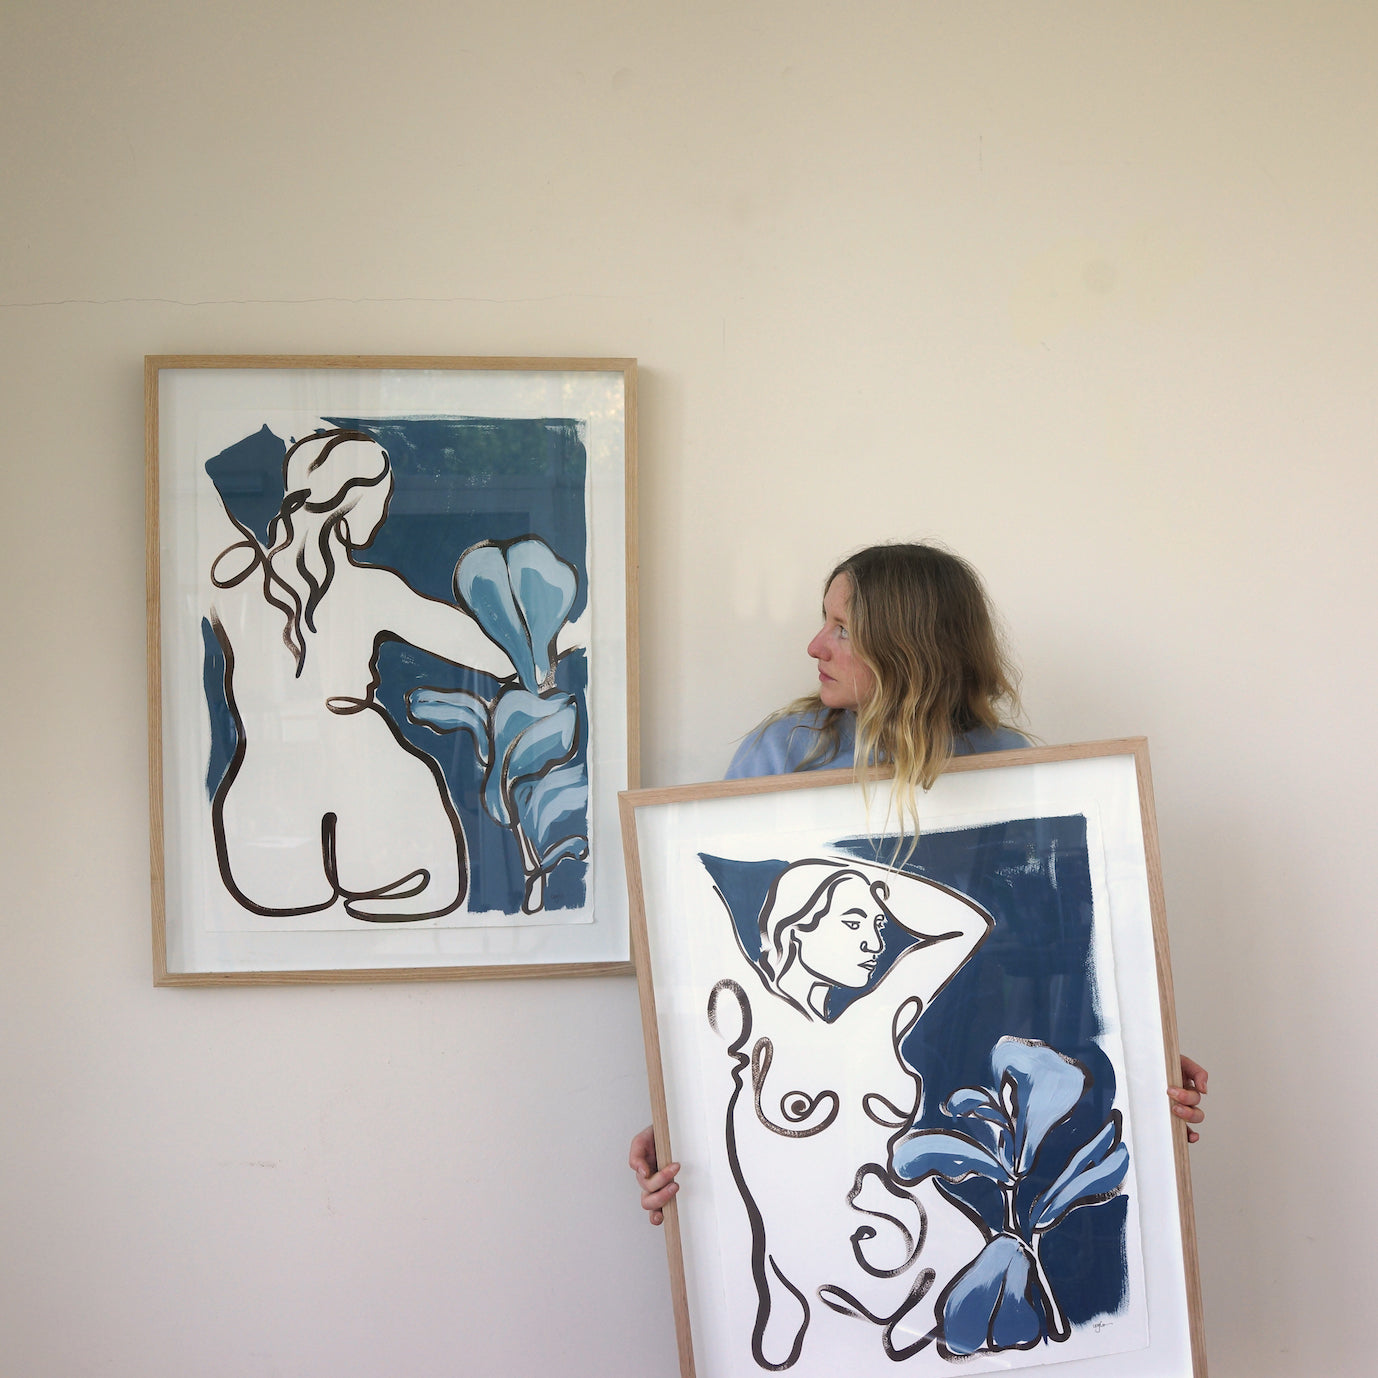 Our conversation with artist Leyla Bulmer